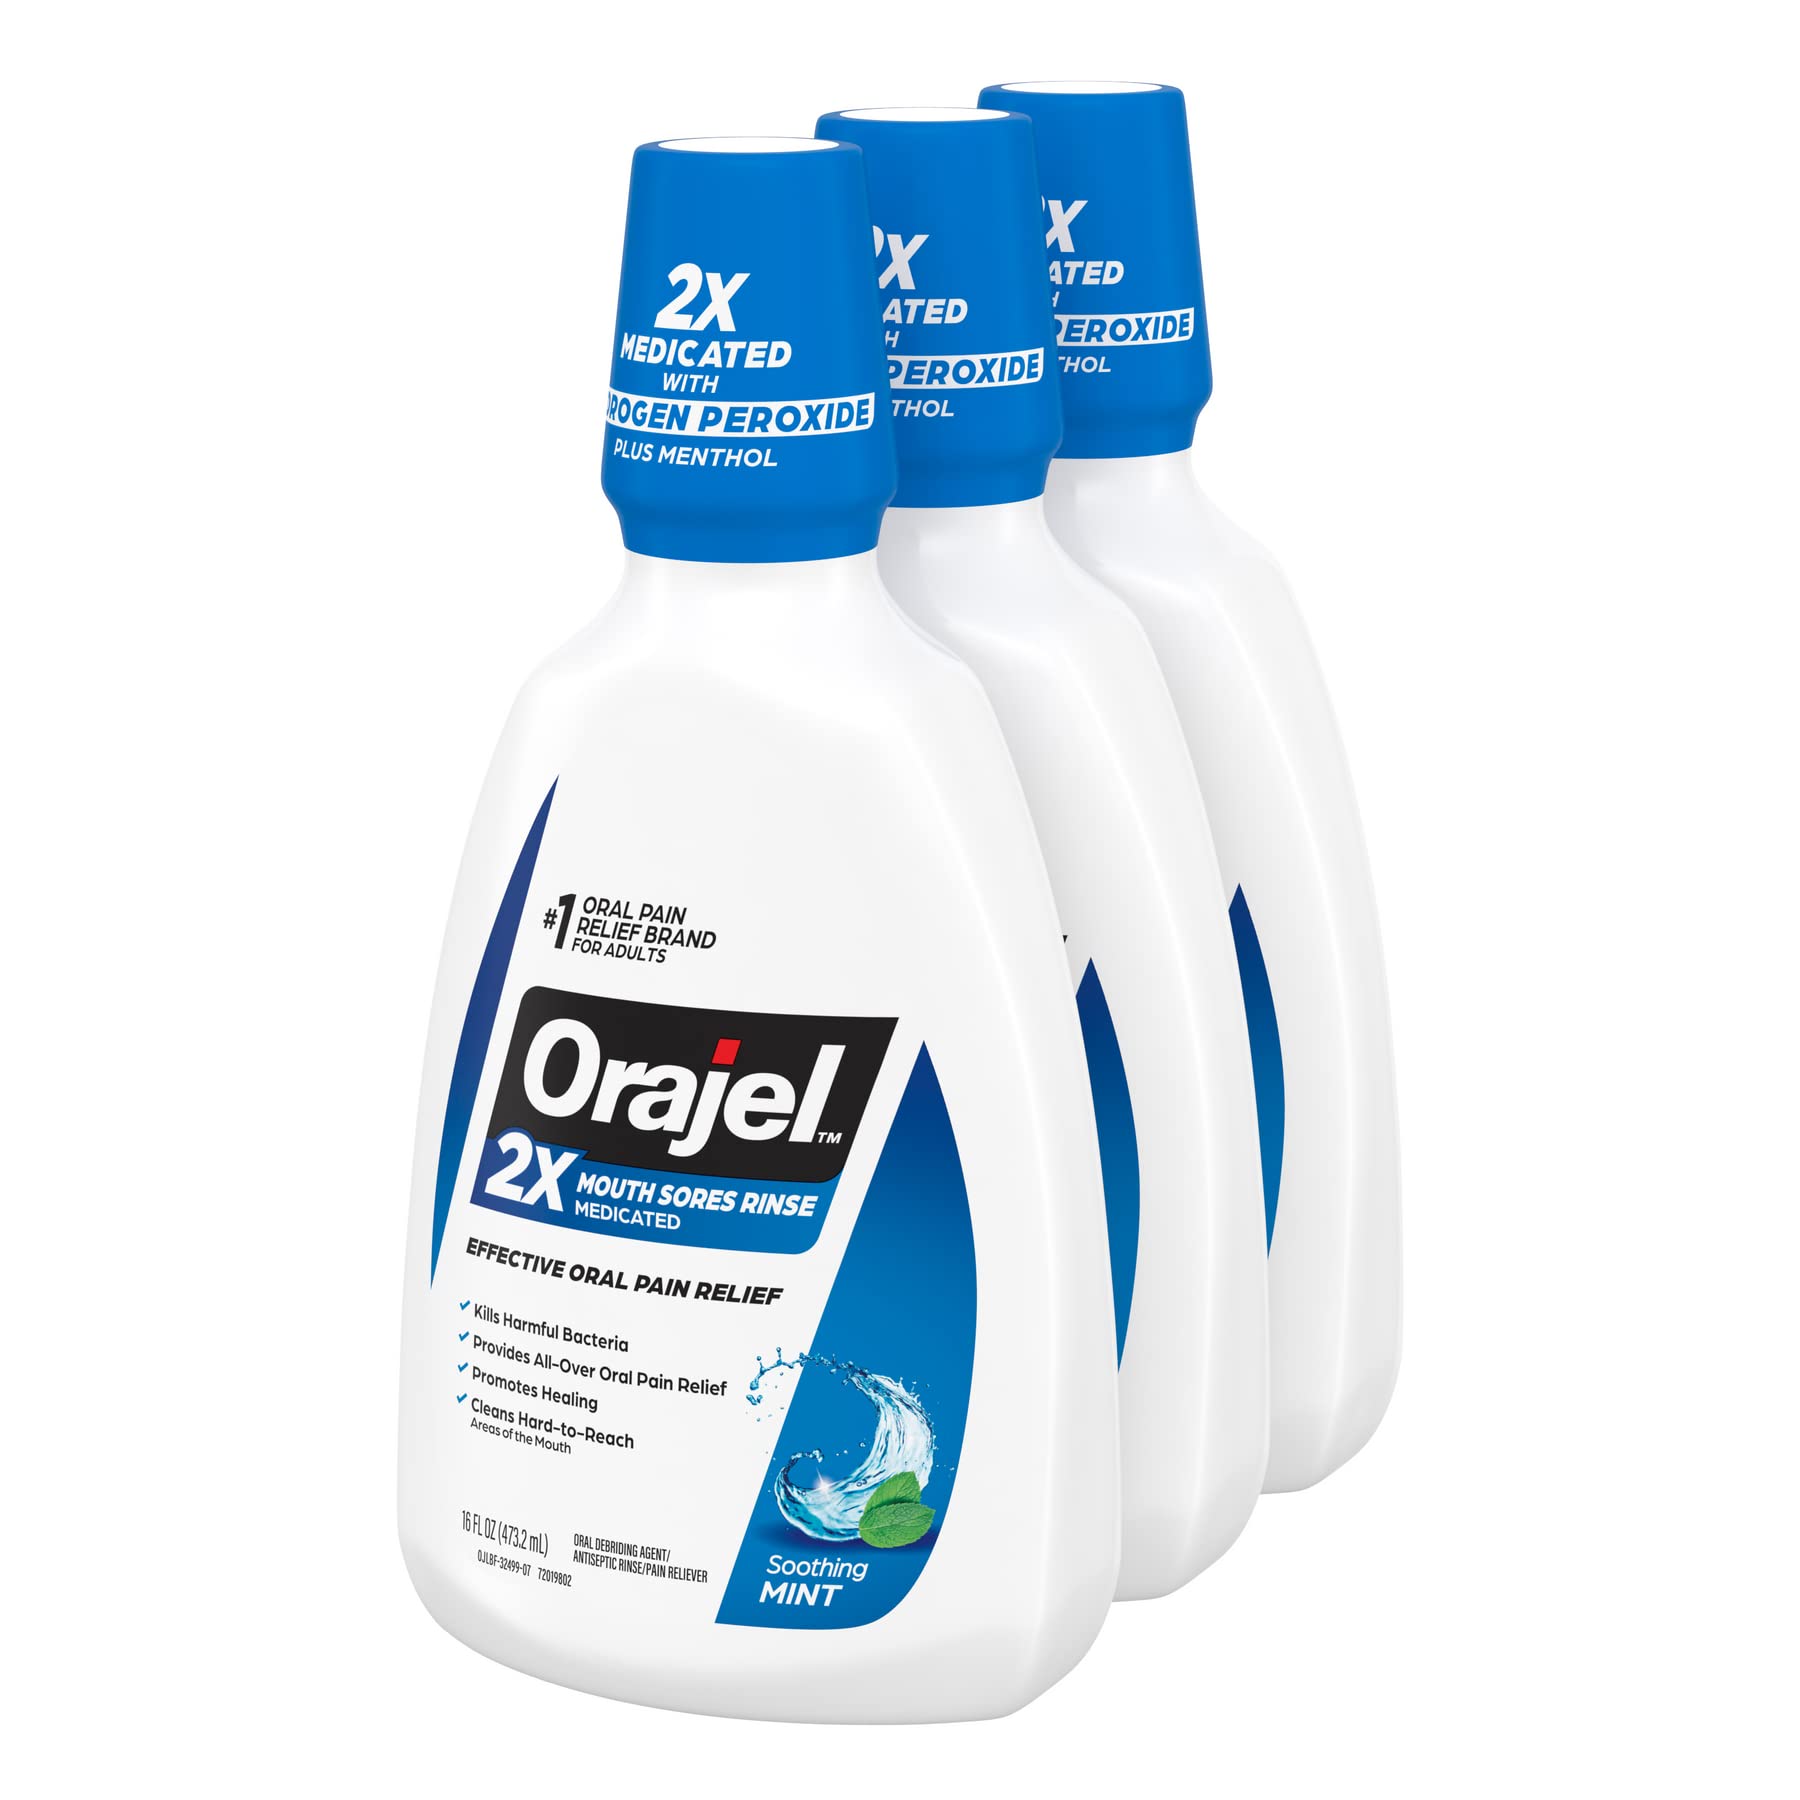 Orajel Nonseptic Mouth Sore Rinse 16oz, Soothing Mint Flavor, Provides Pain Relief, Promotes Healing, 3-Pack